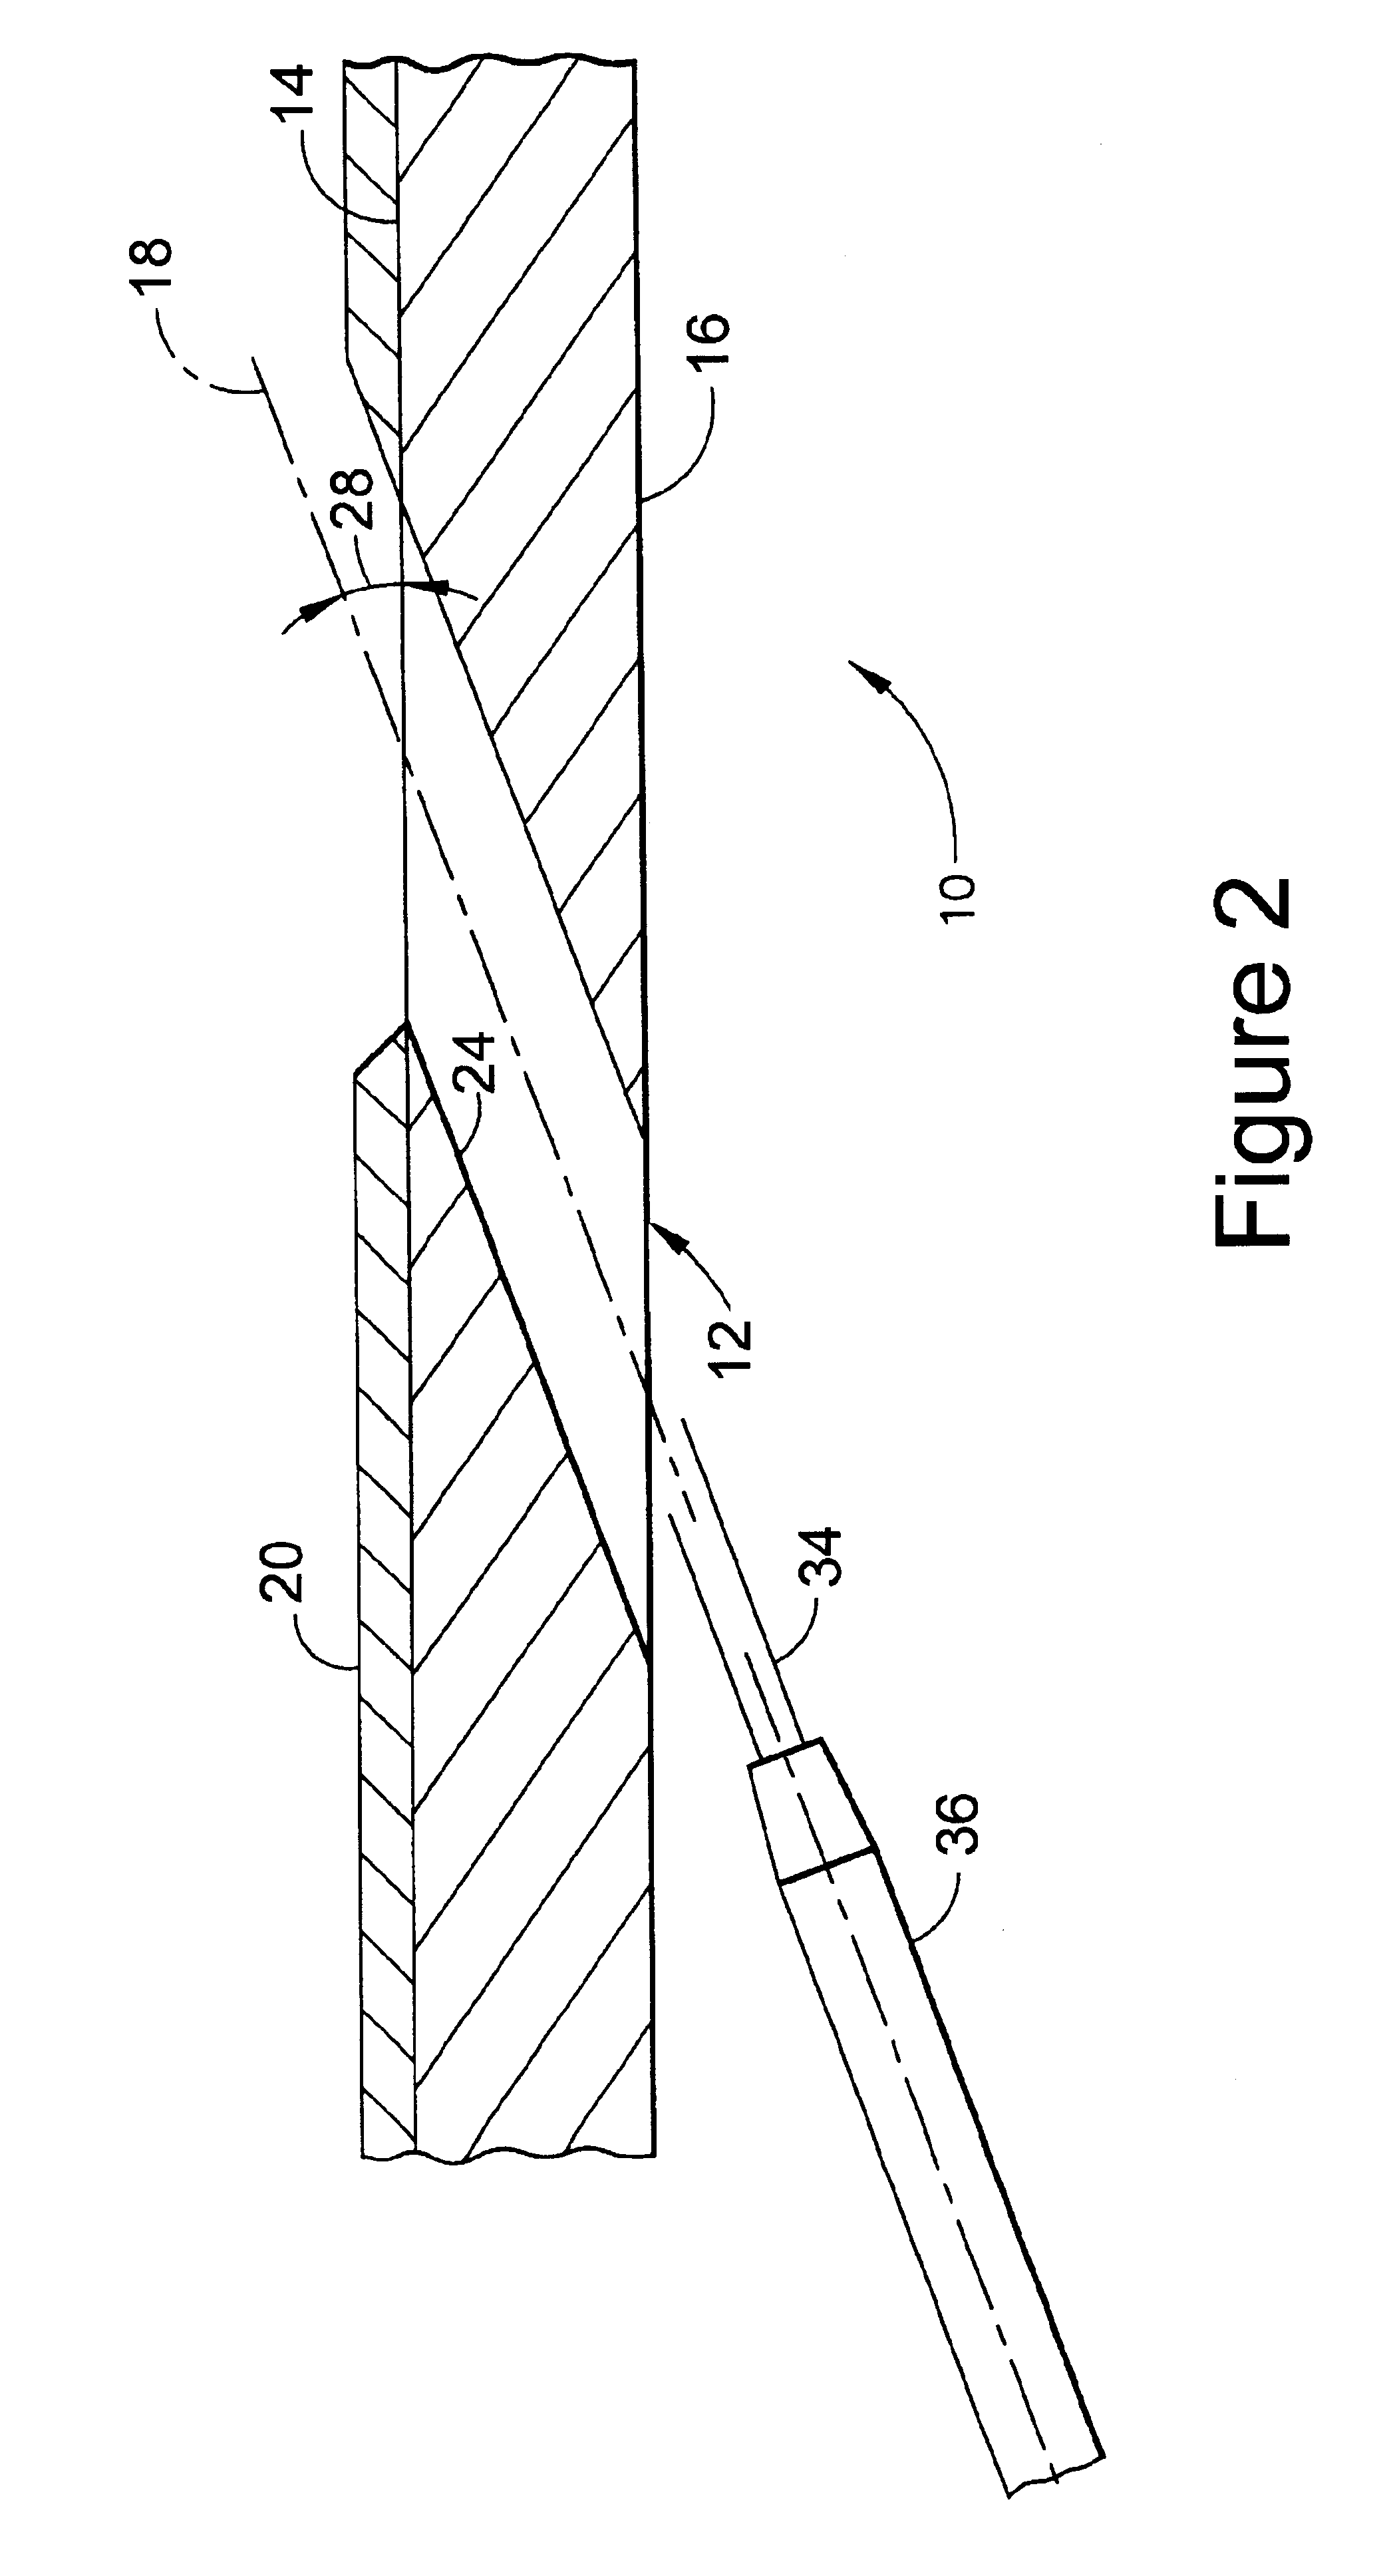 Coated component with through-hole having improved surface finish